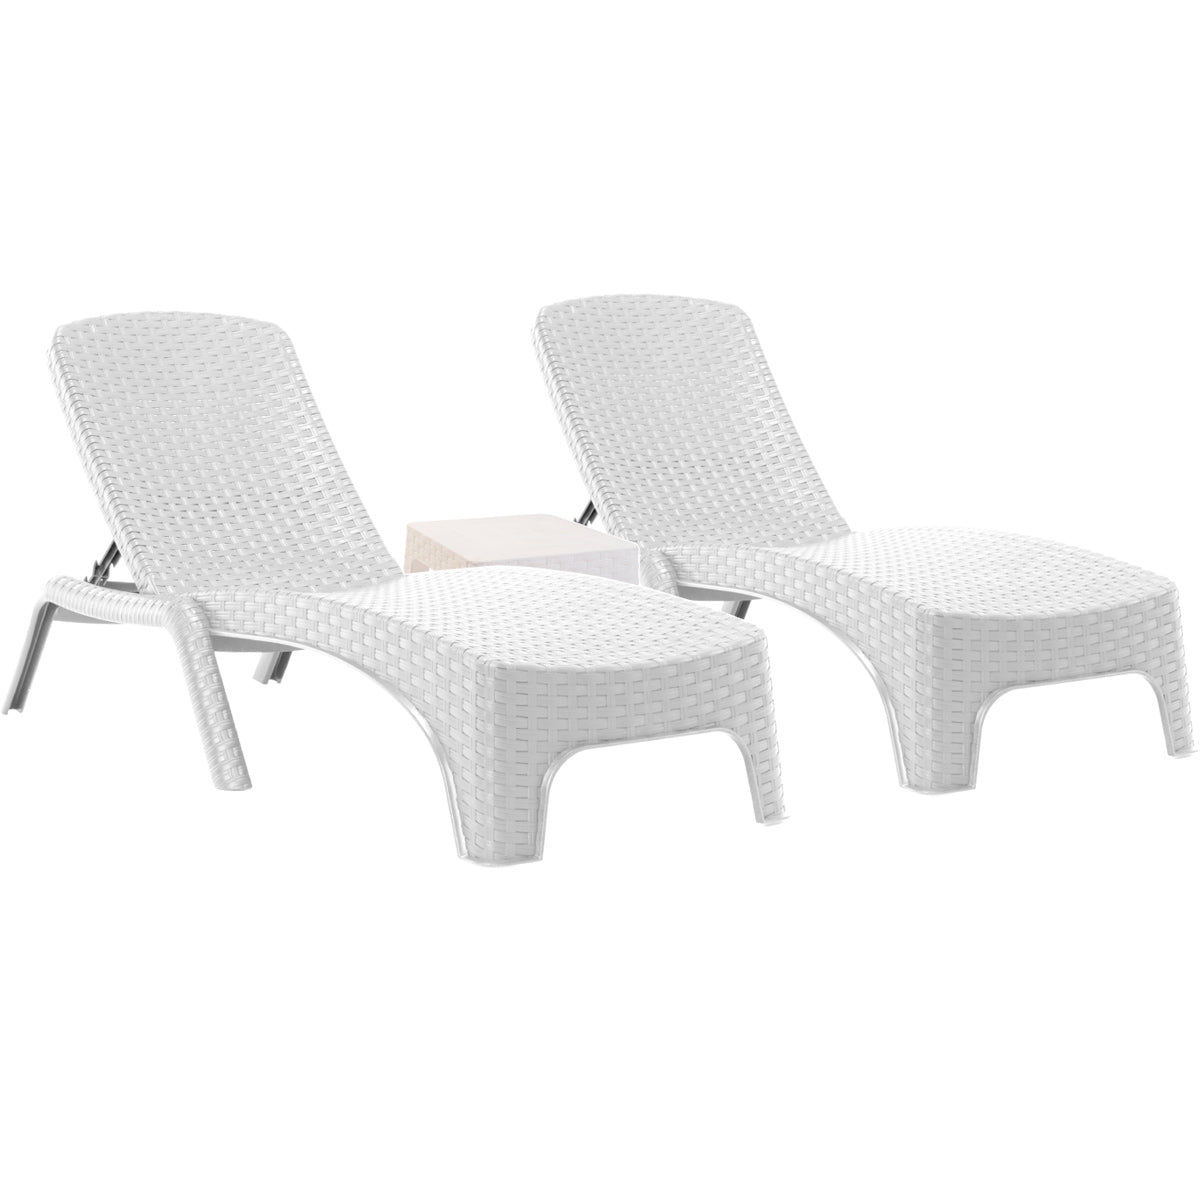 Rainbow Outdoor Roma 3-Piece Chaise Lounger Set-White